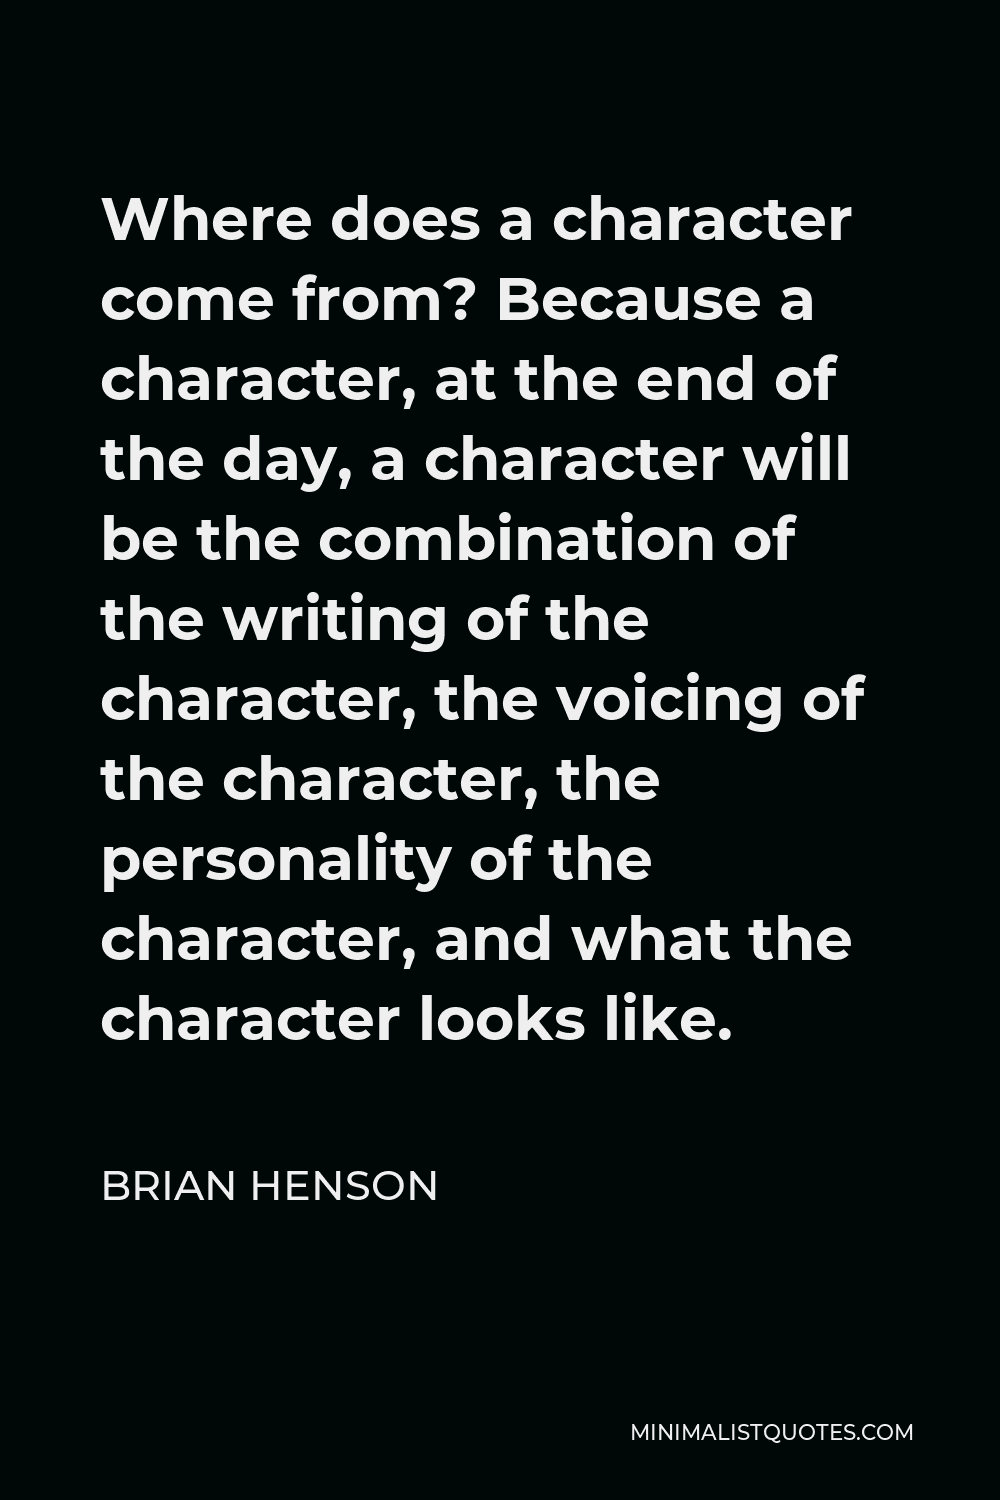 Brian Henson Quote - Where does a character come from? Because a character, at the end of the day, a character will be the combination of the writing of the character, the voicing of the character, the personality of the character, and what the character looks like.